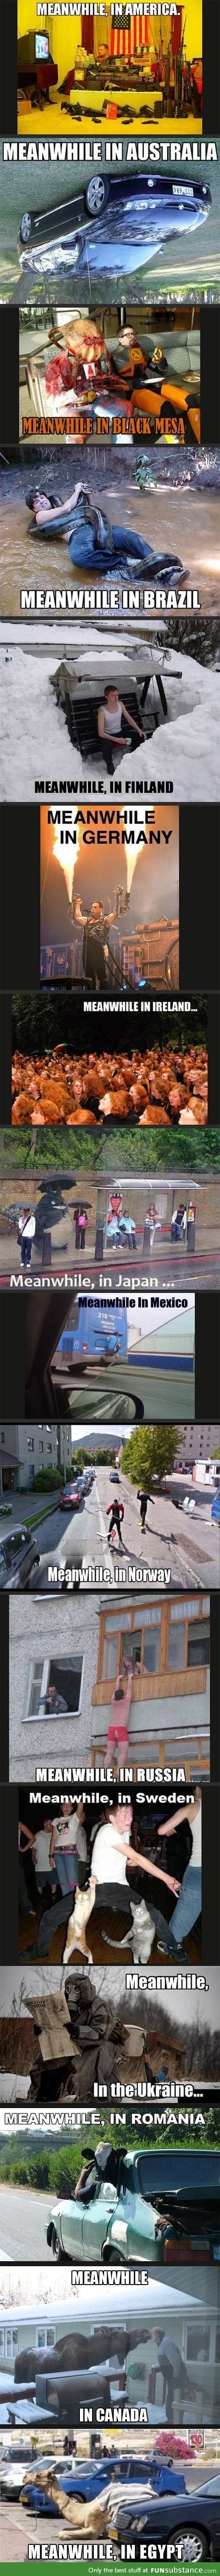 Meanwhile in different countries